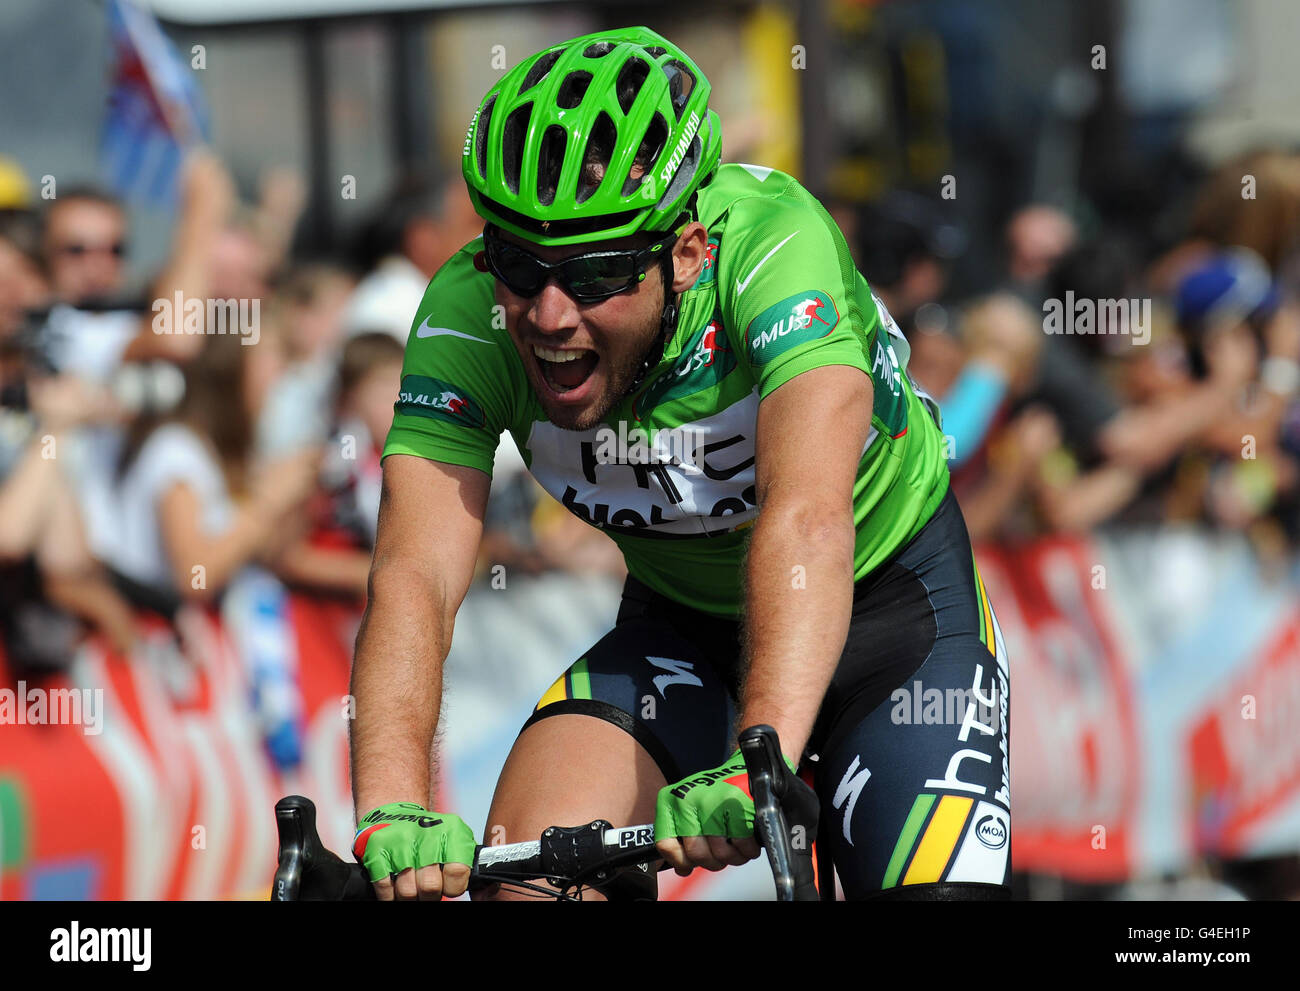 Great Britain's Mark Cavendish celebrates winning the green sprinters jersey  during stage twenty one of the Tour de France from Creteil to Paris, France  Stock Photo - Alamy